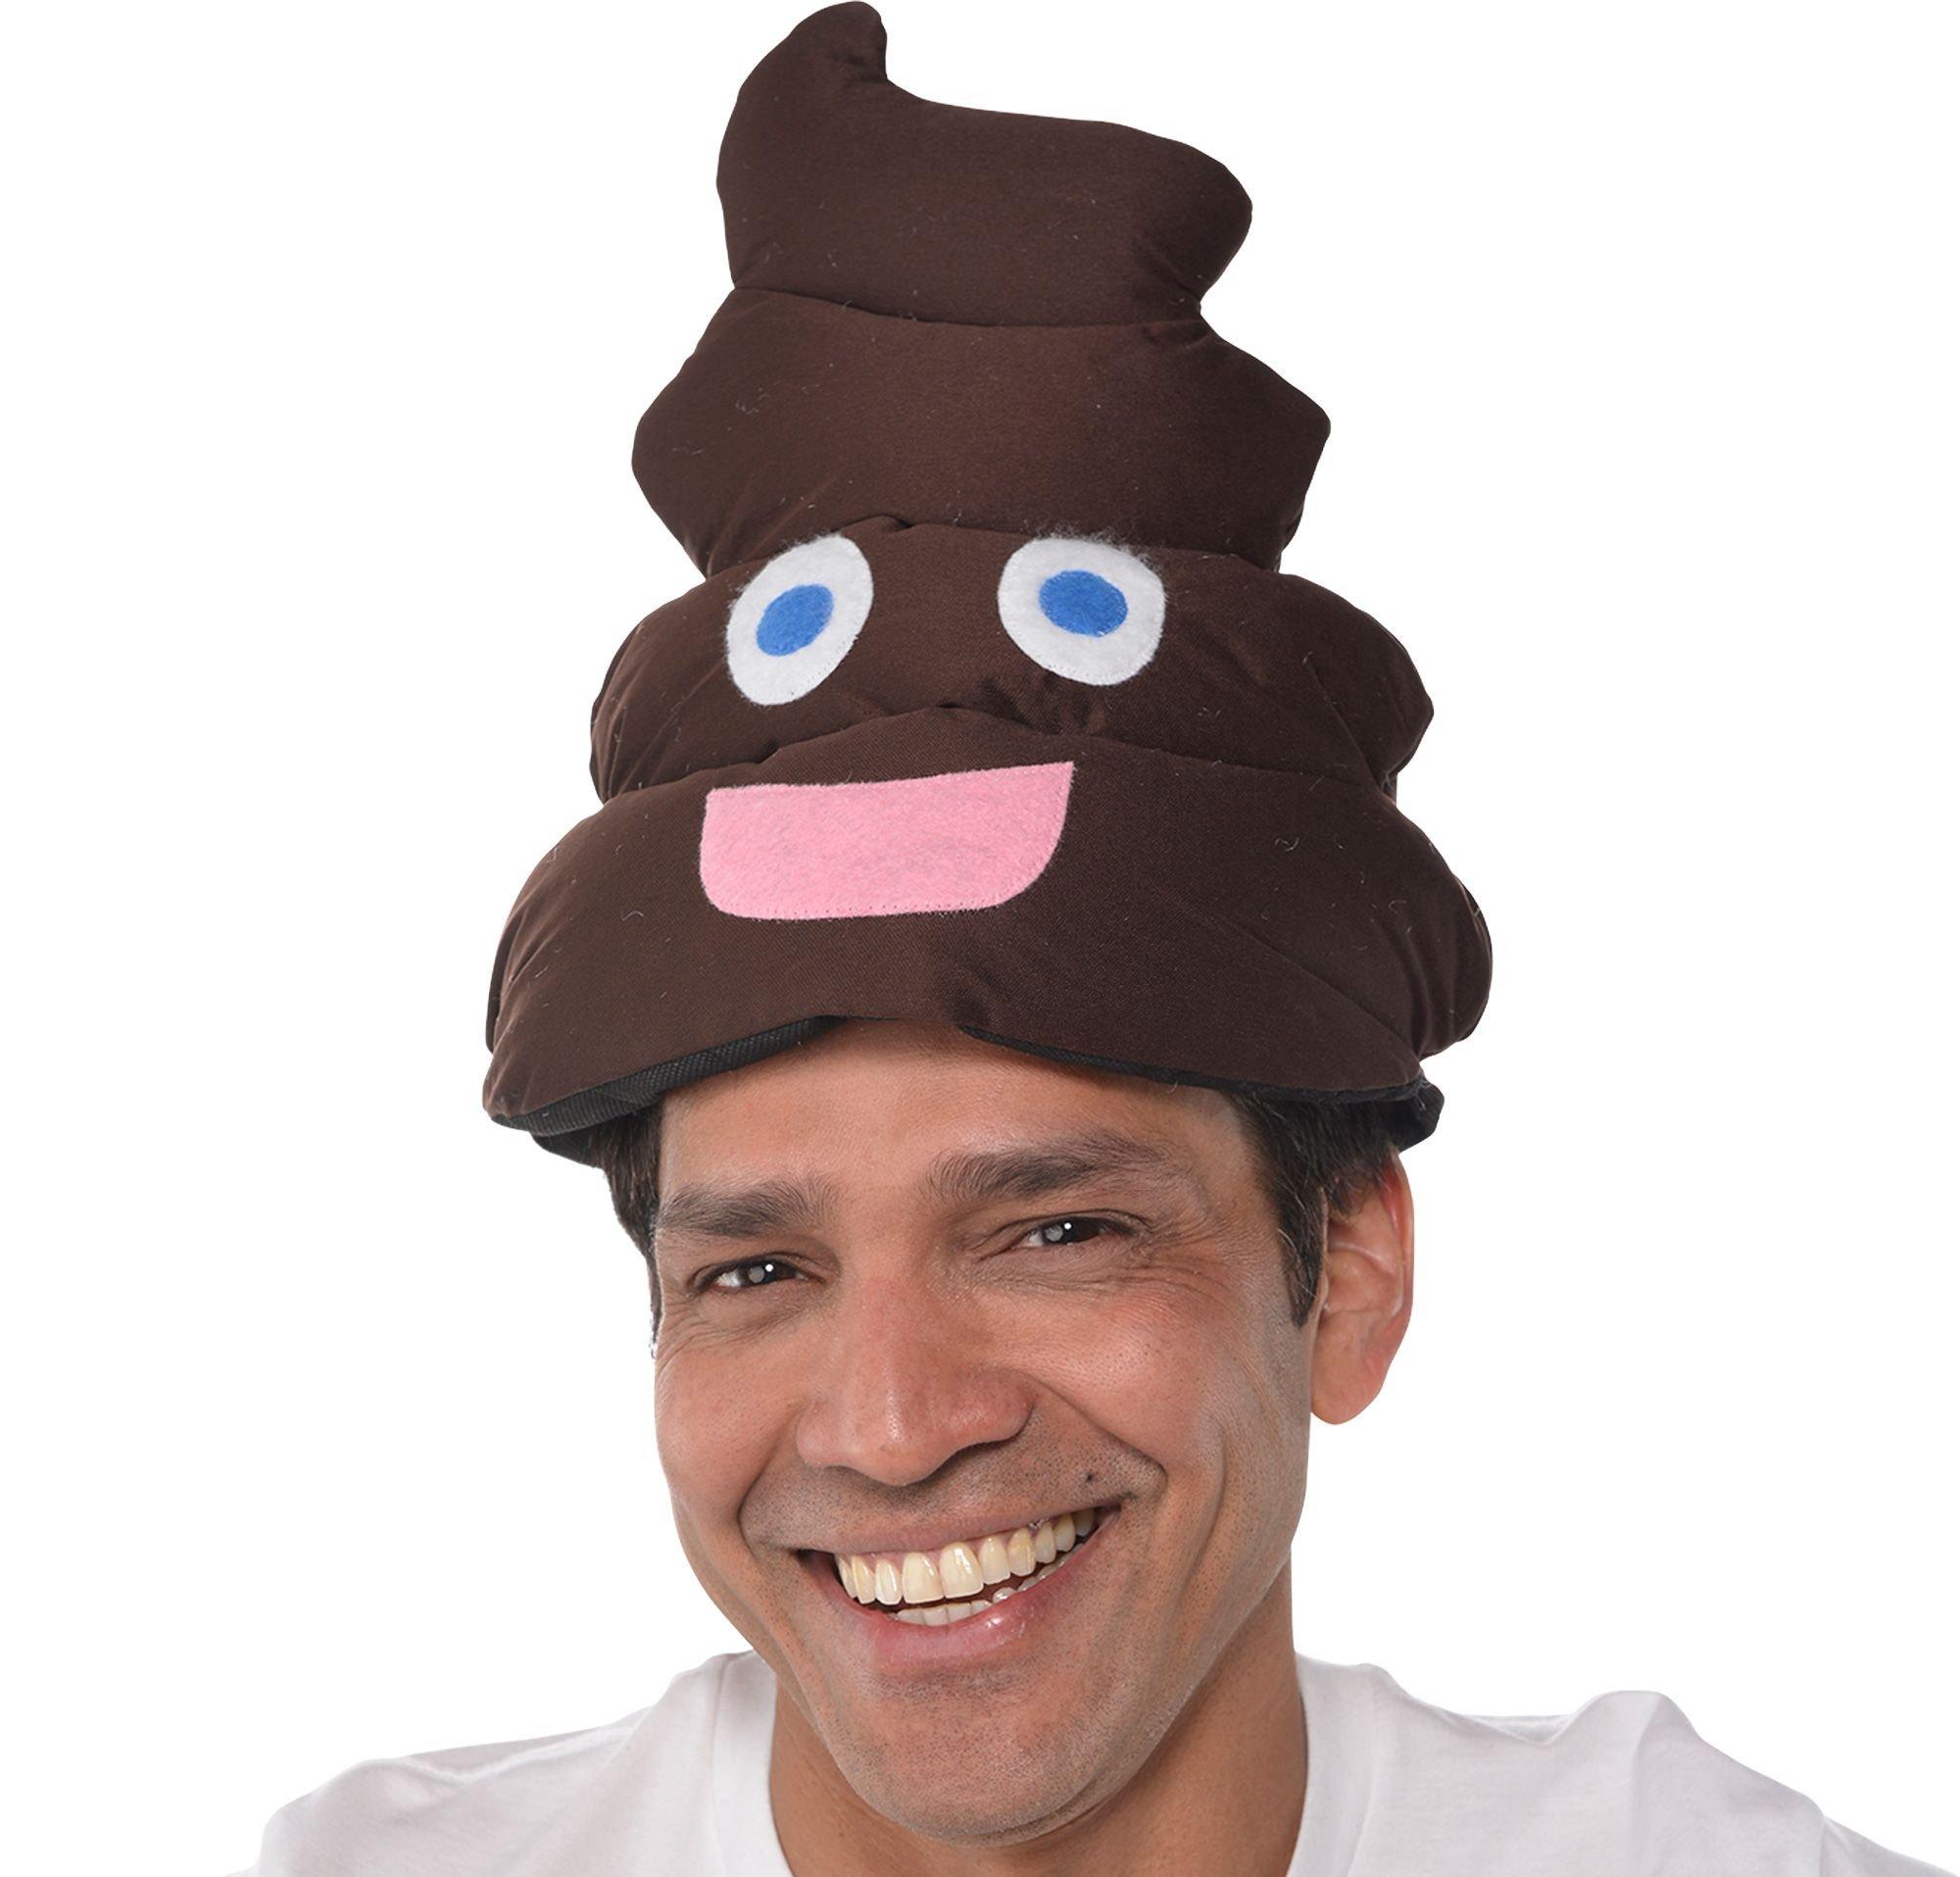 Funny Hats - Silly & Weird Hats